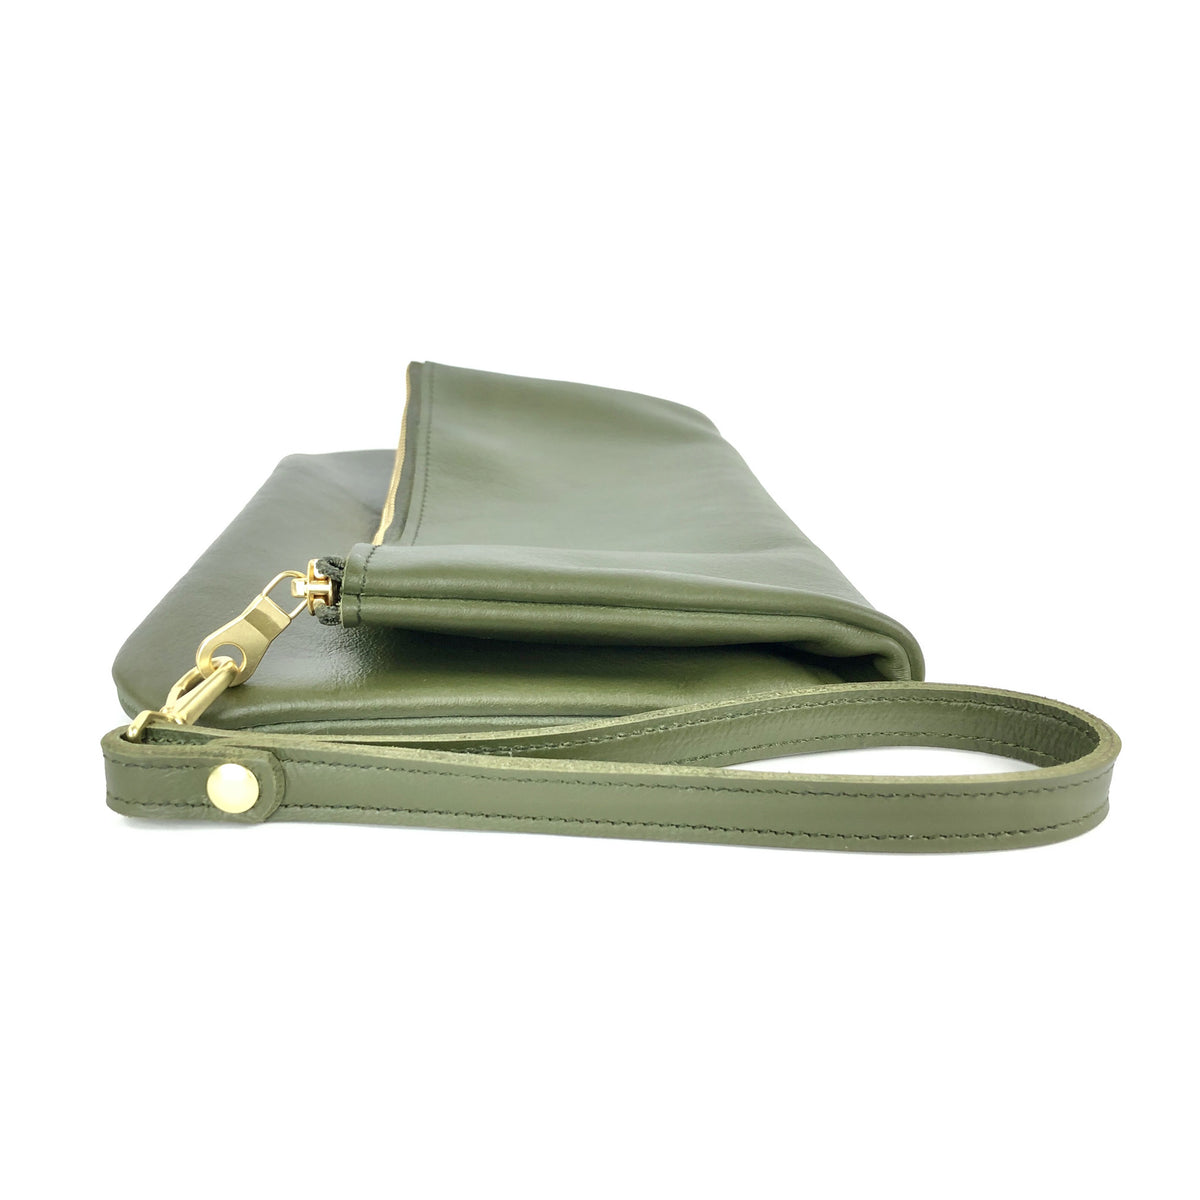 Foldover Clutch With Tabs - Monkee's of Johnson City